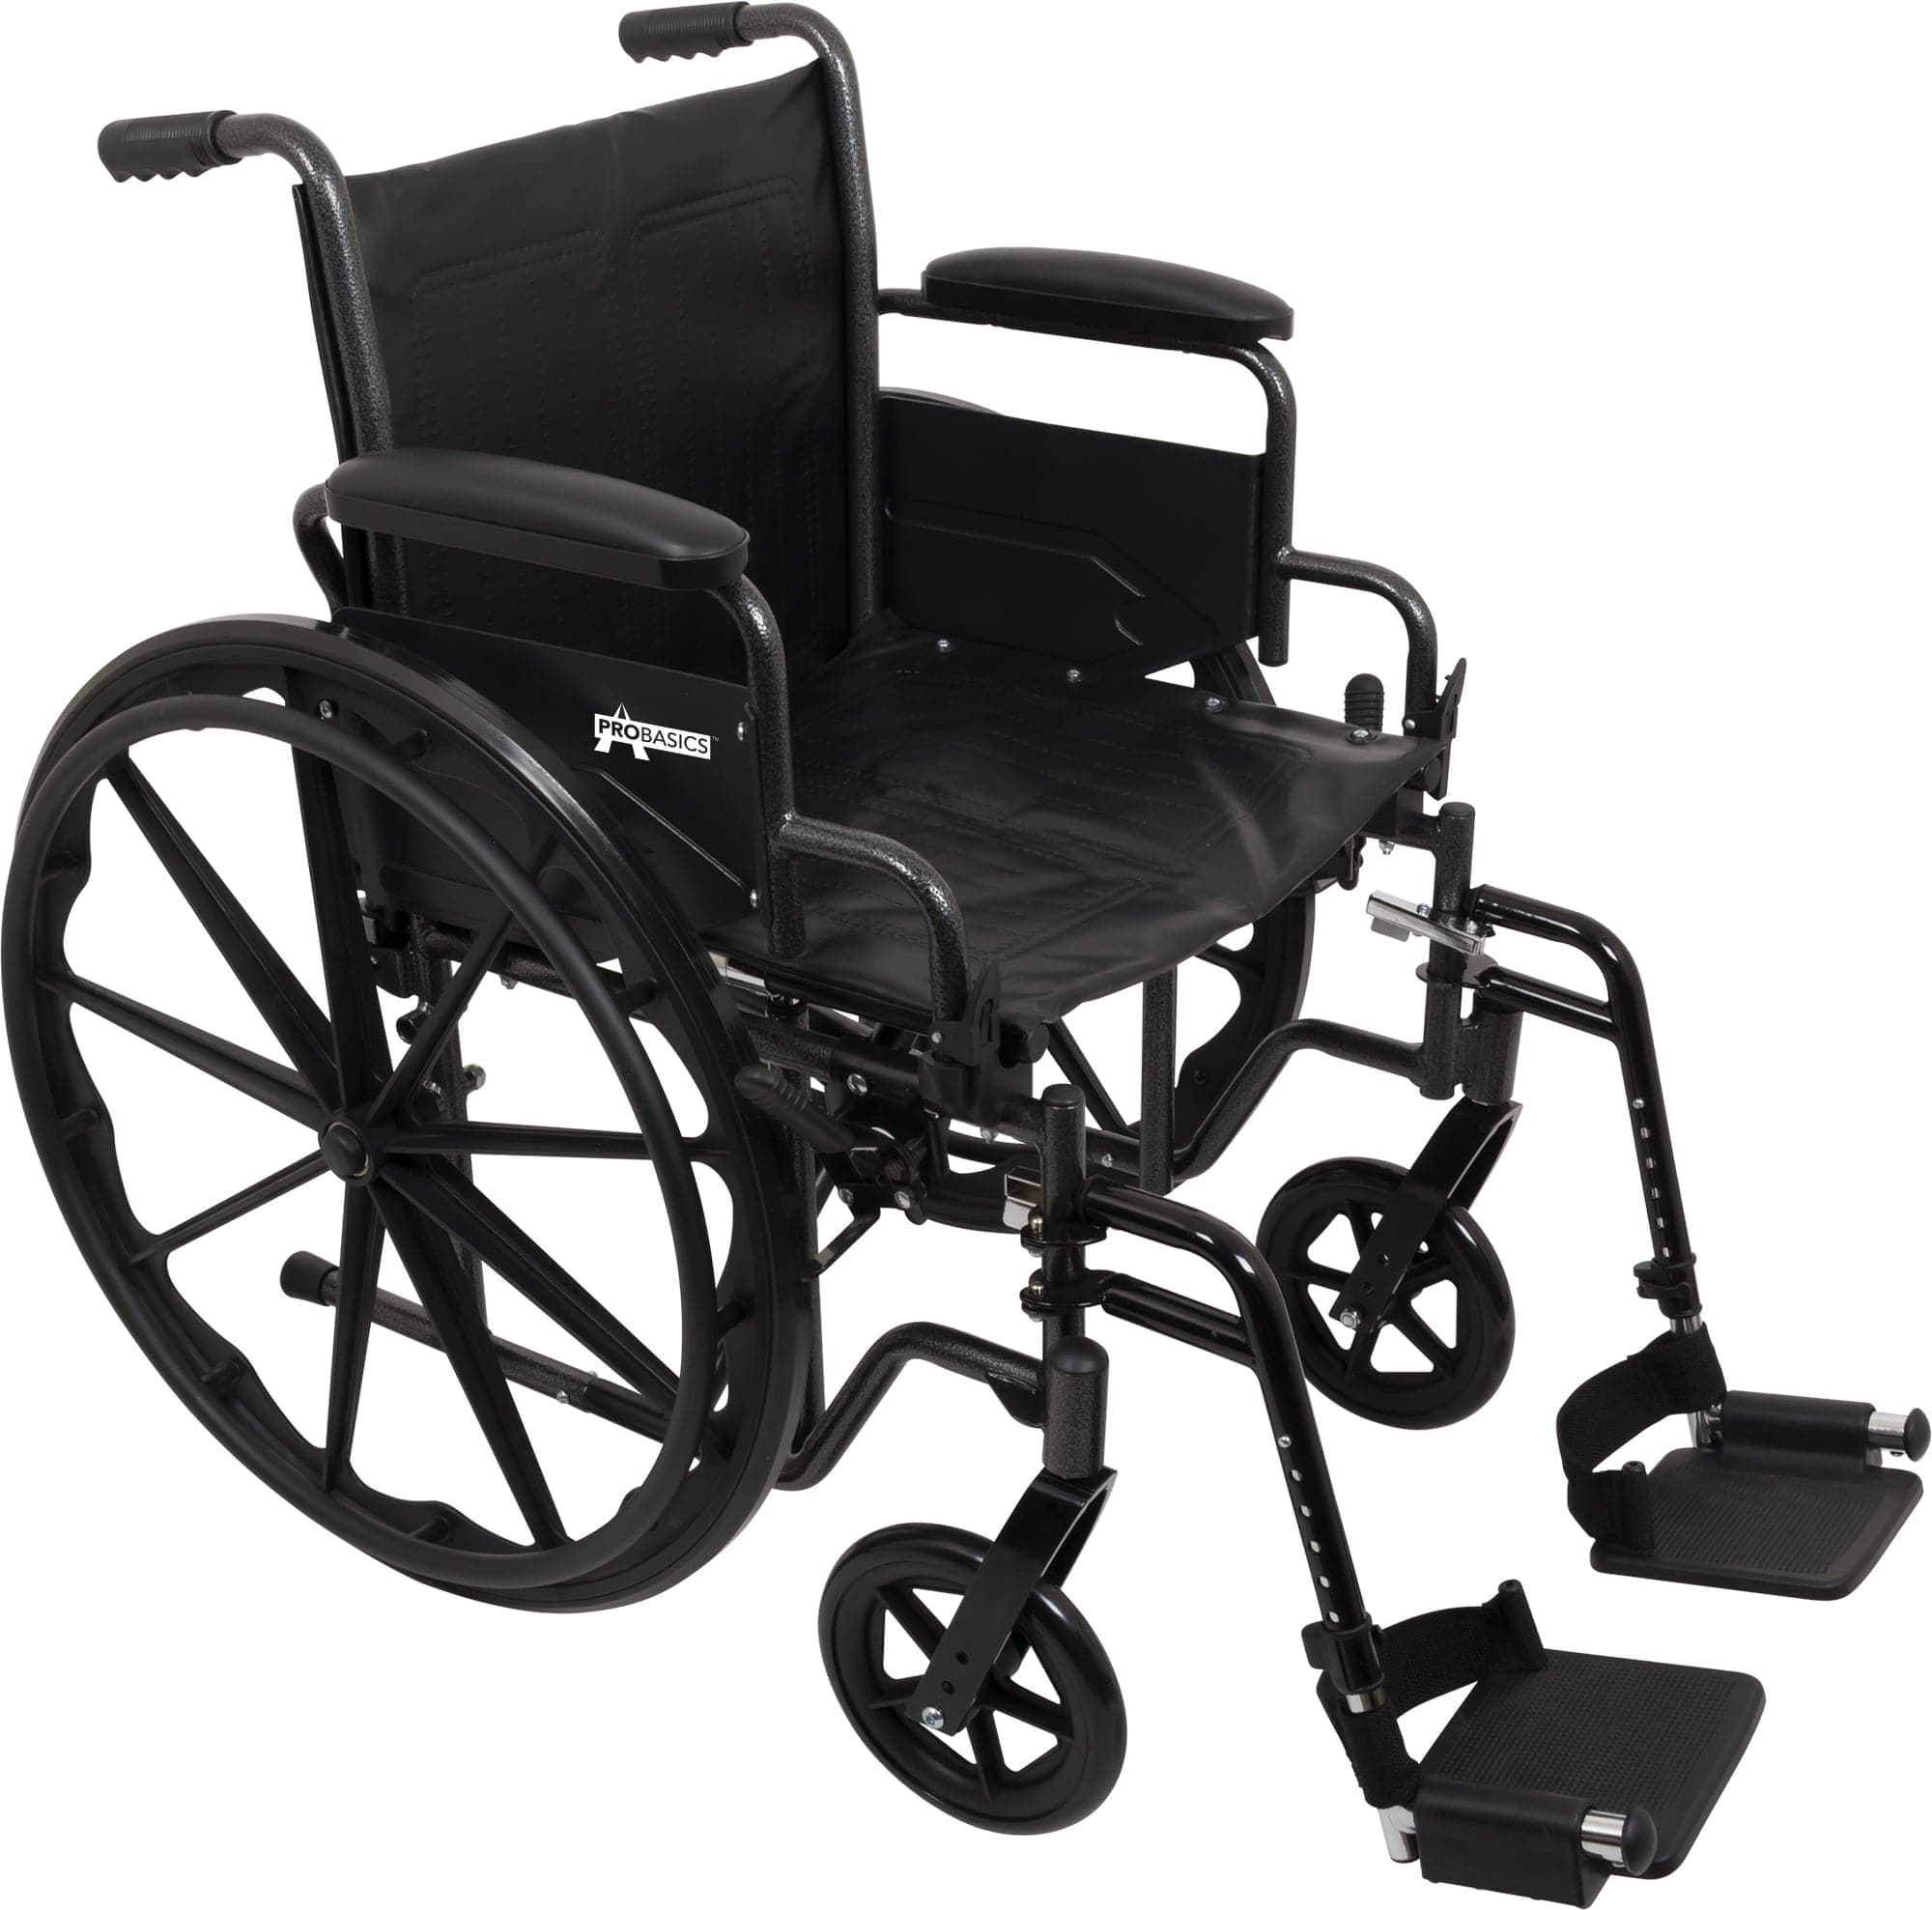 Compass Health K2 Wheelchairs Compass Health ProBasics K2 Wheelchair with 16" x 16" Seat and Swing-Away Footrests